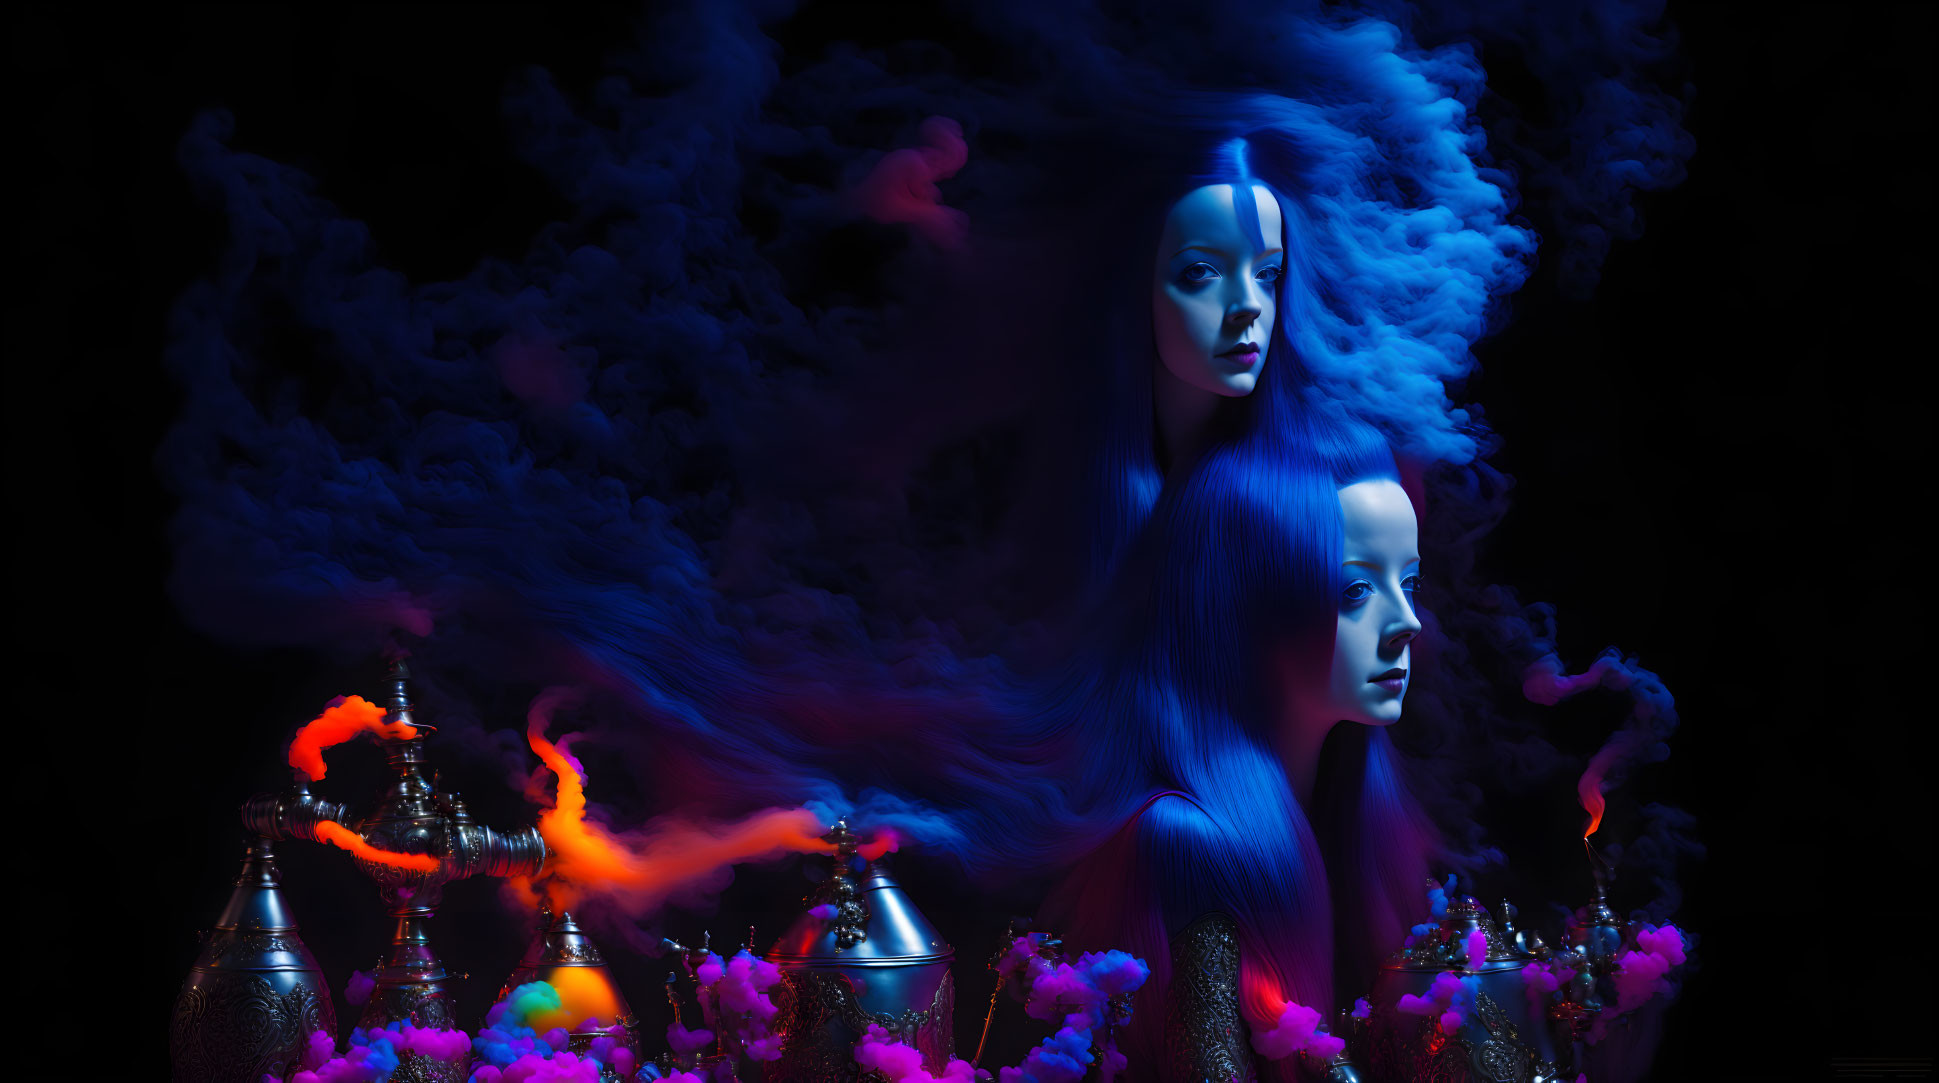 Surreal female figures with blue hair in colorful smoke and vases on black background